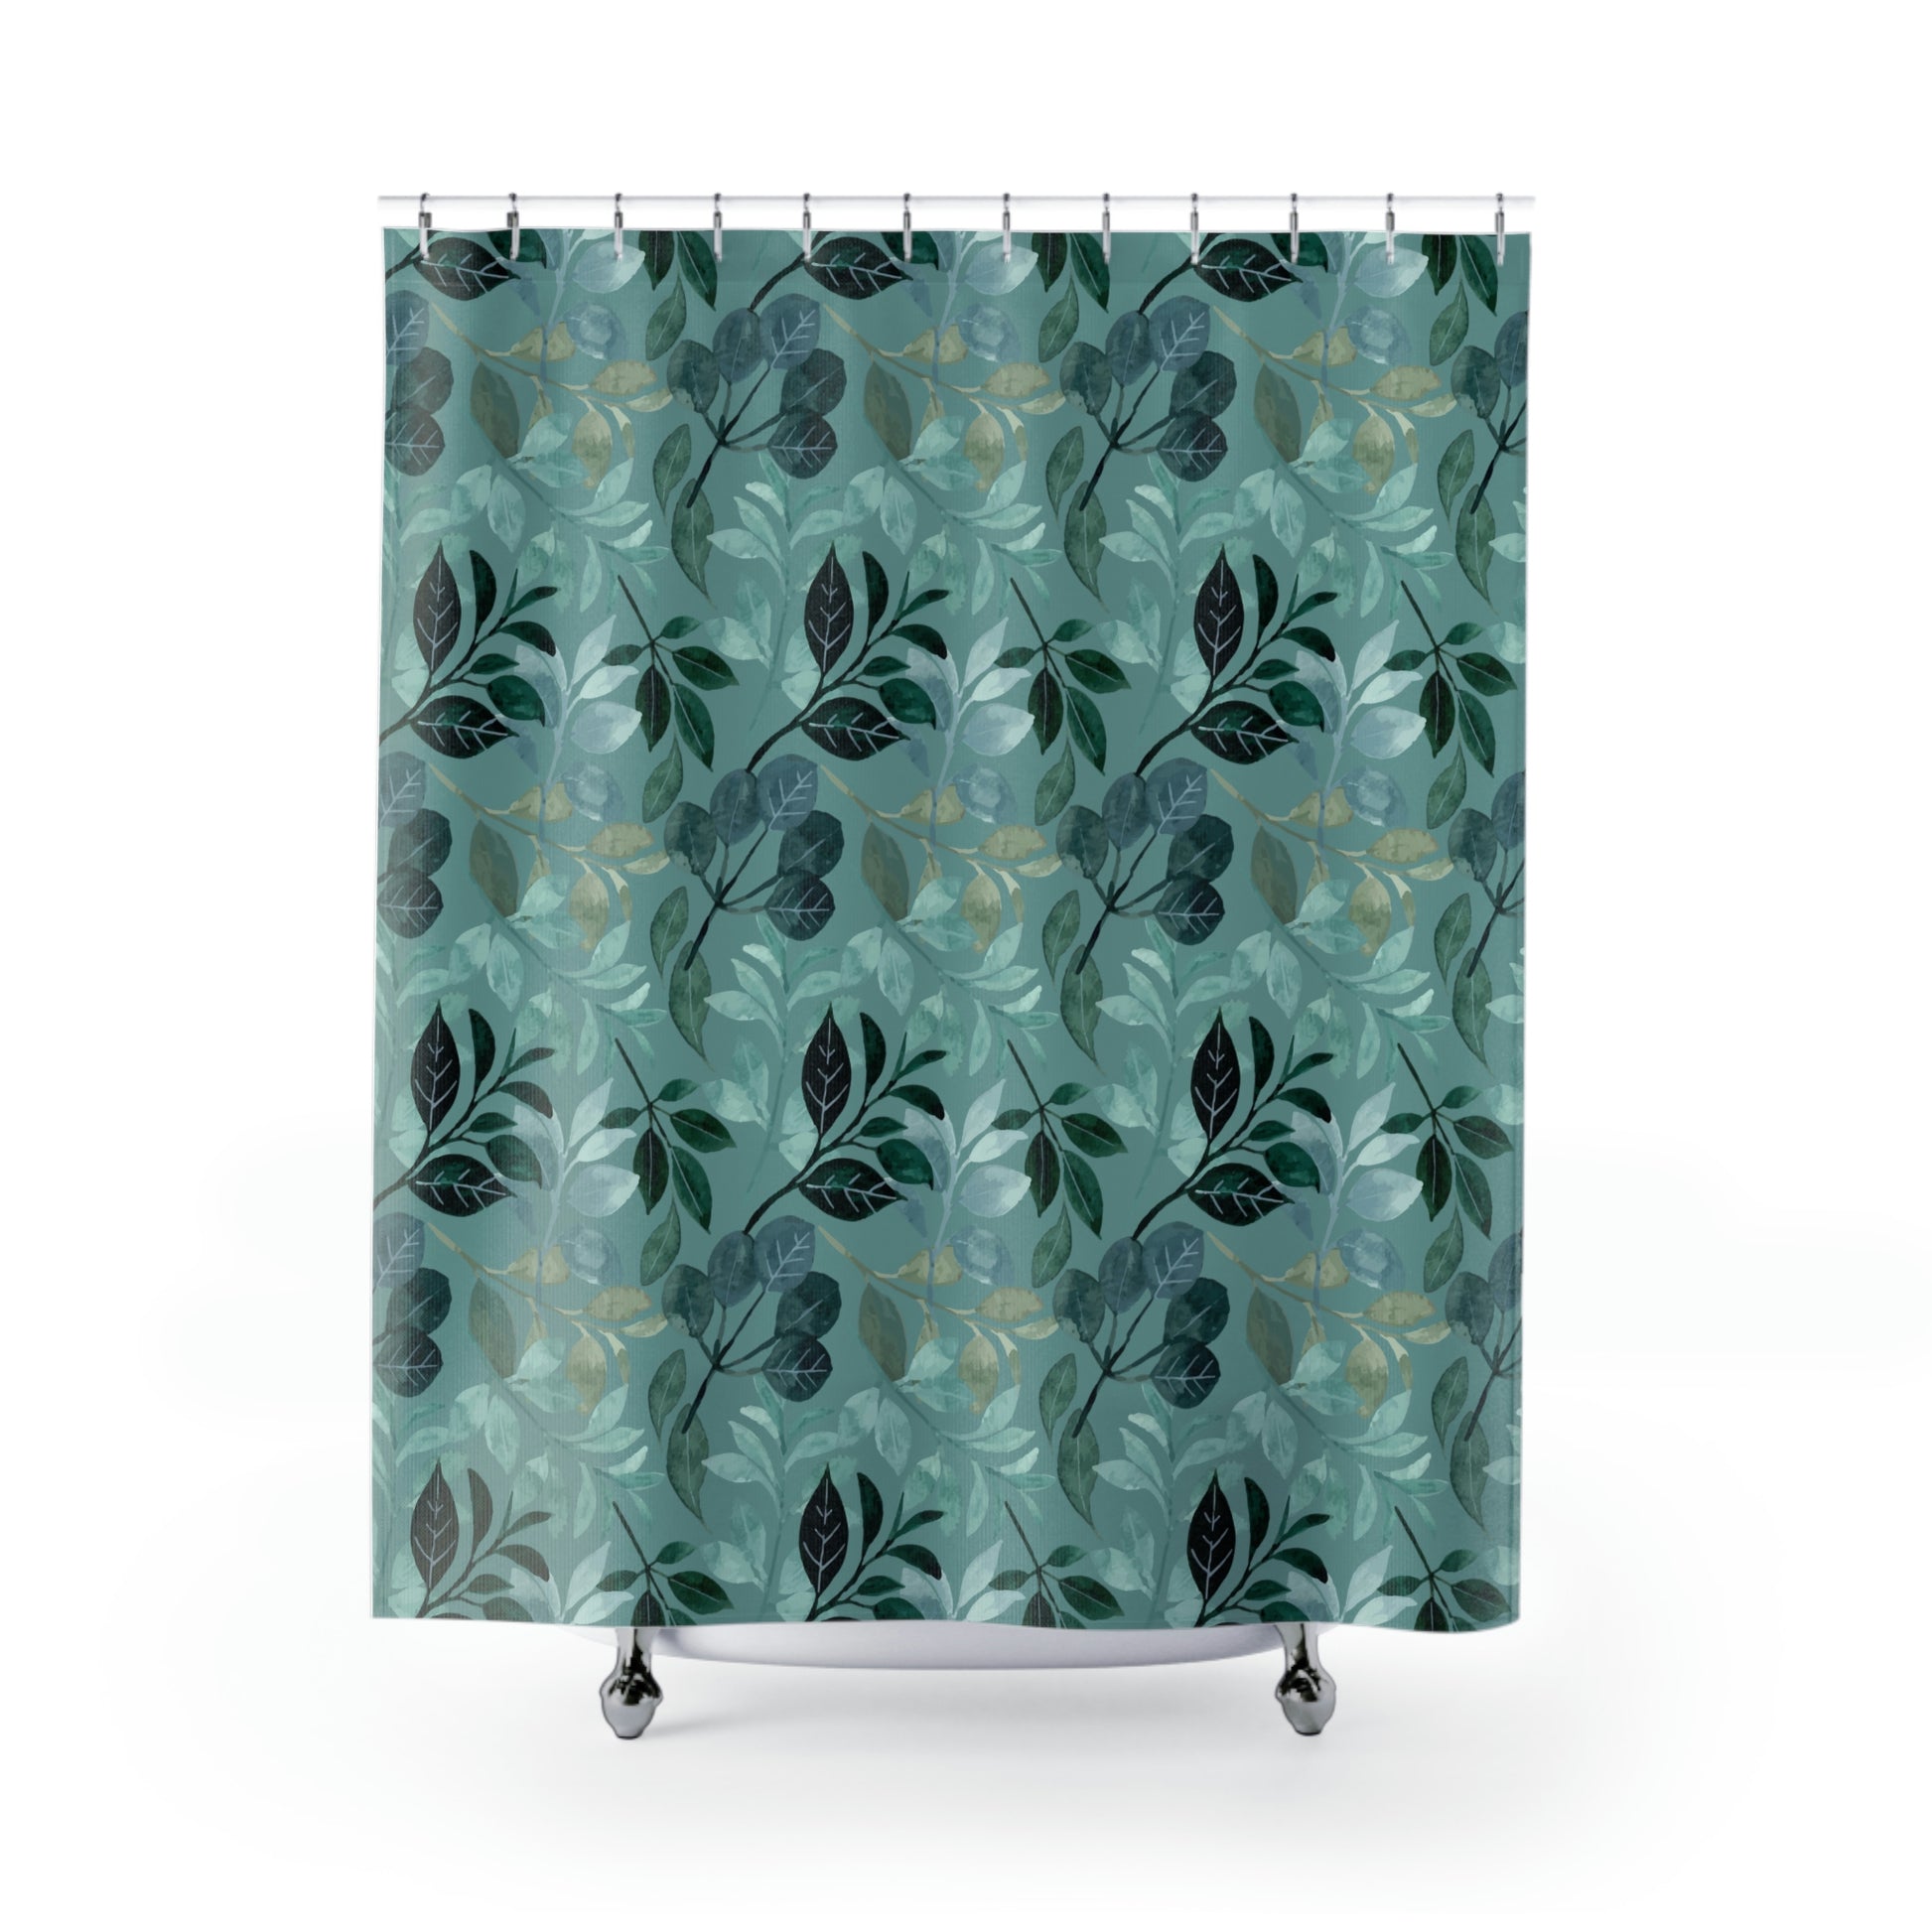 teal shower curtain with floral pattern of beige, green and navy blue flowers